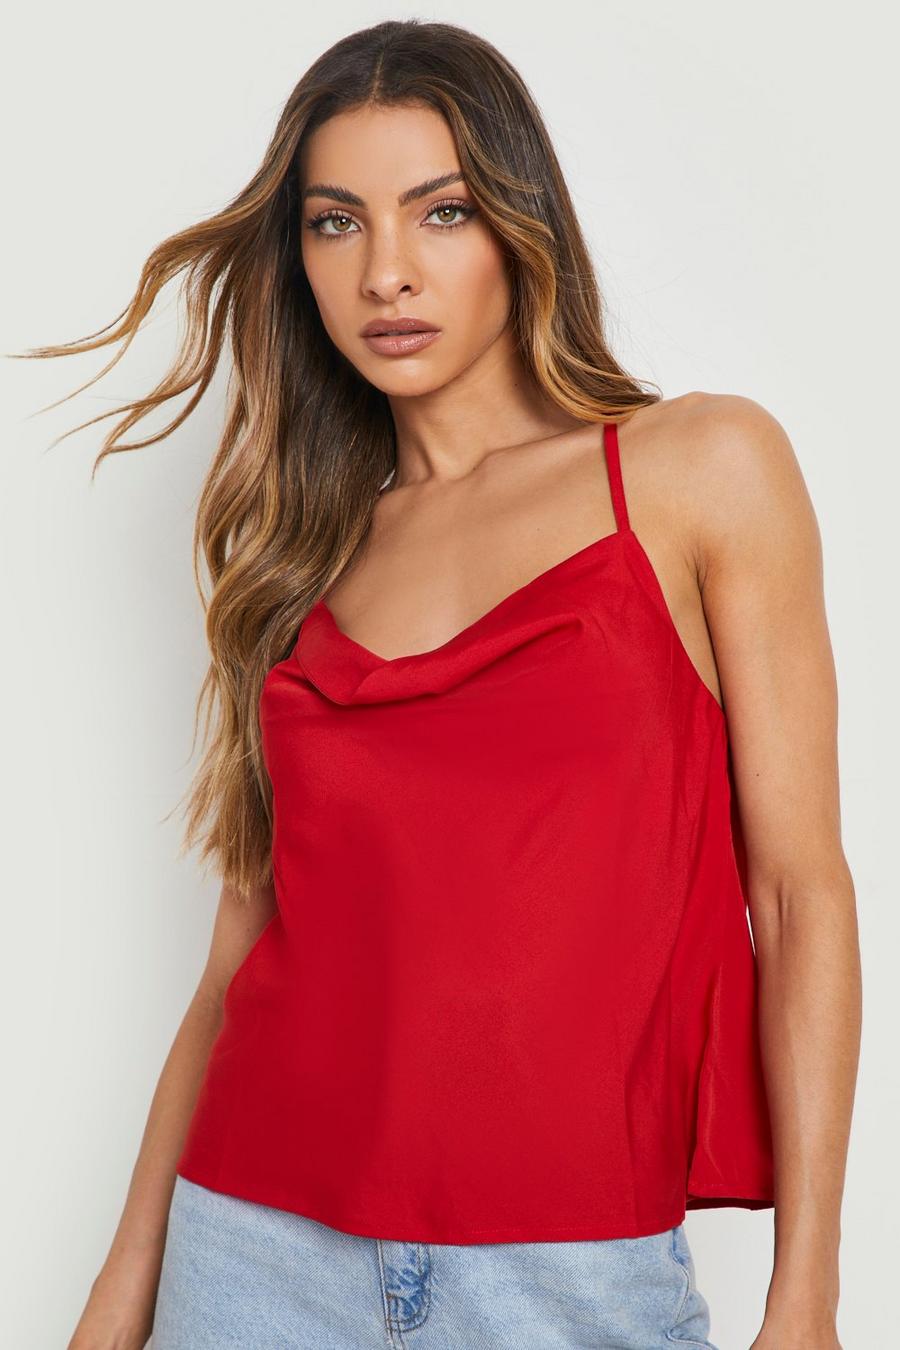 Red Tops For Women  Red Lace, Jersey & More